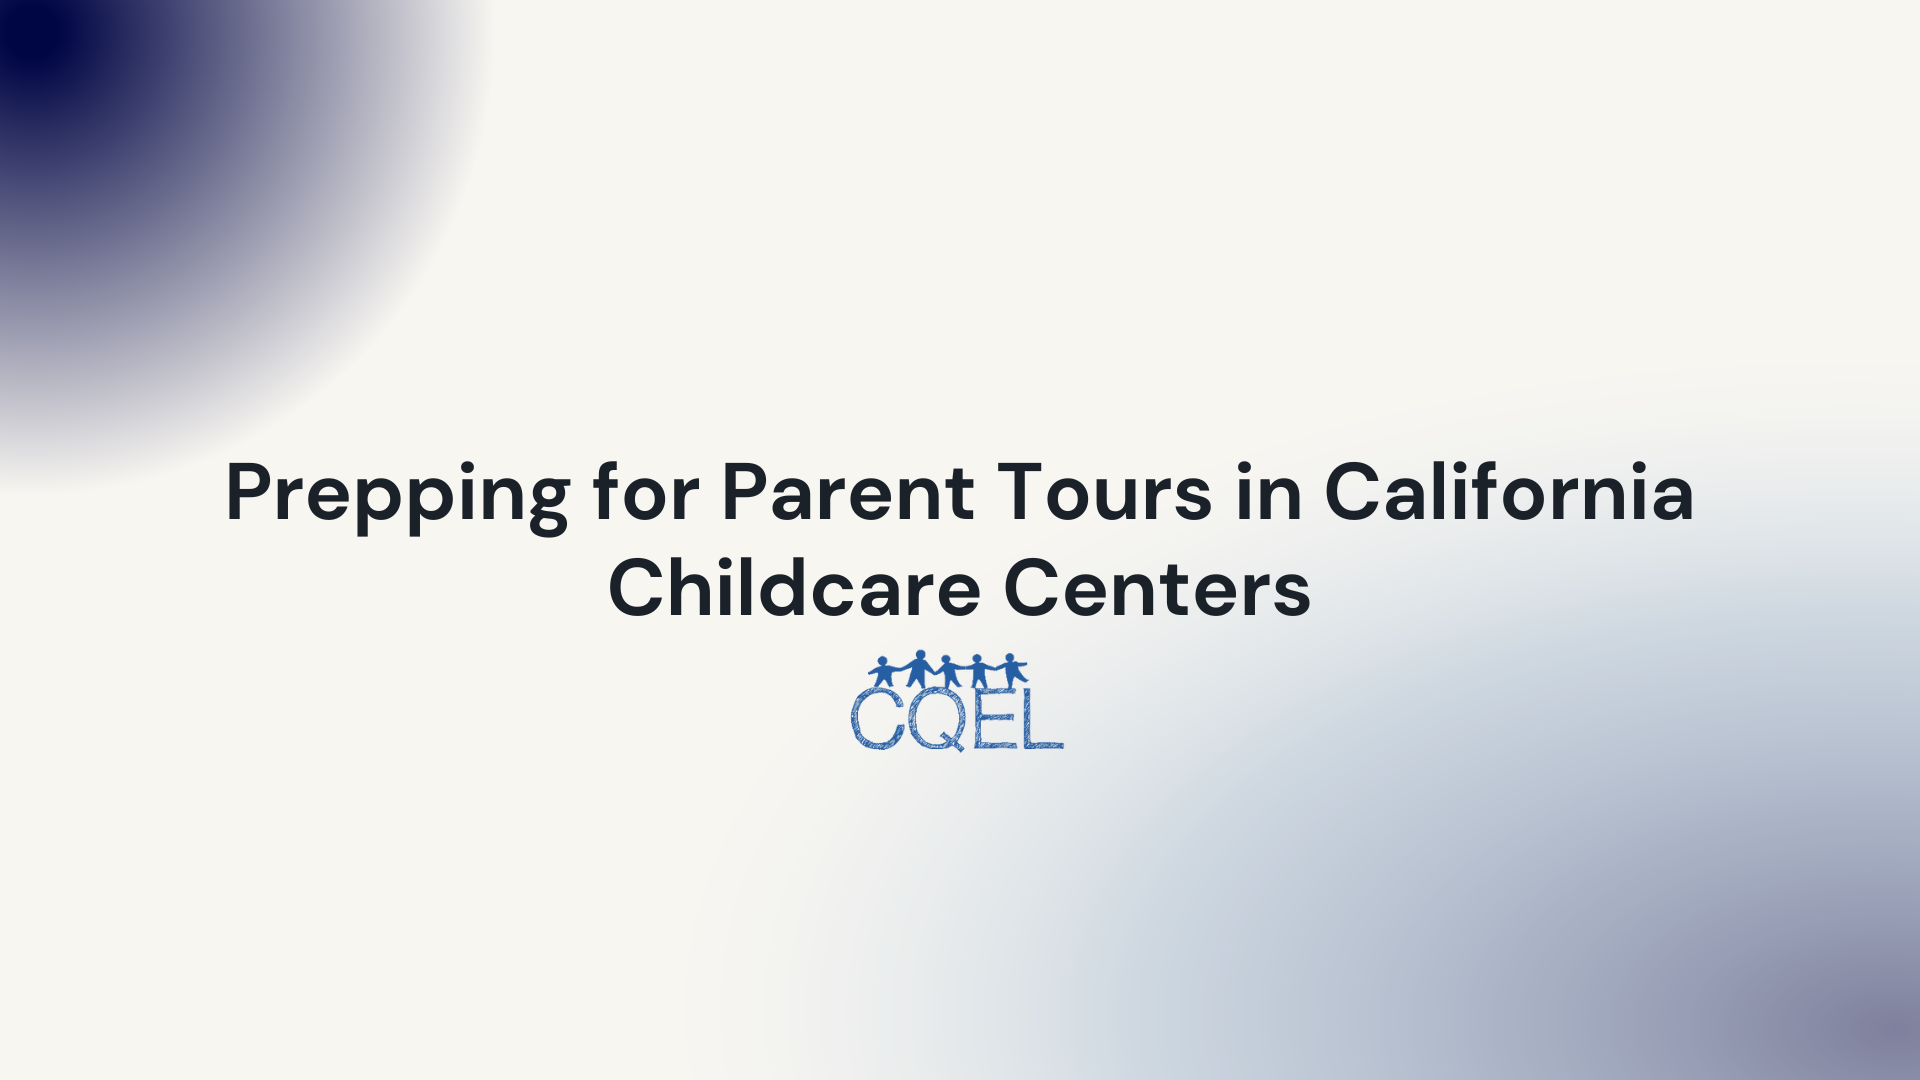 Prepping for Parent Tours in California Childcare Centers